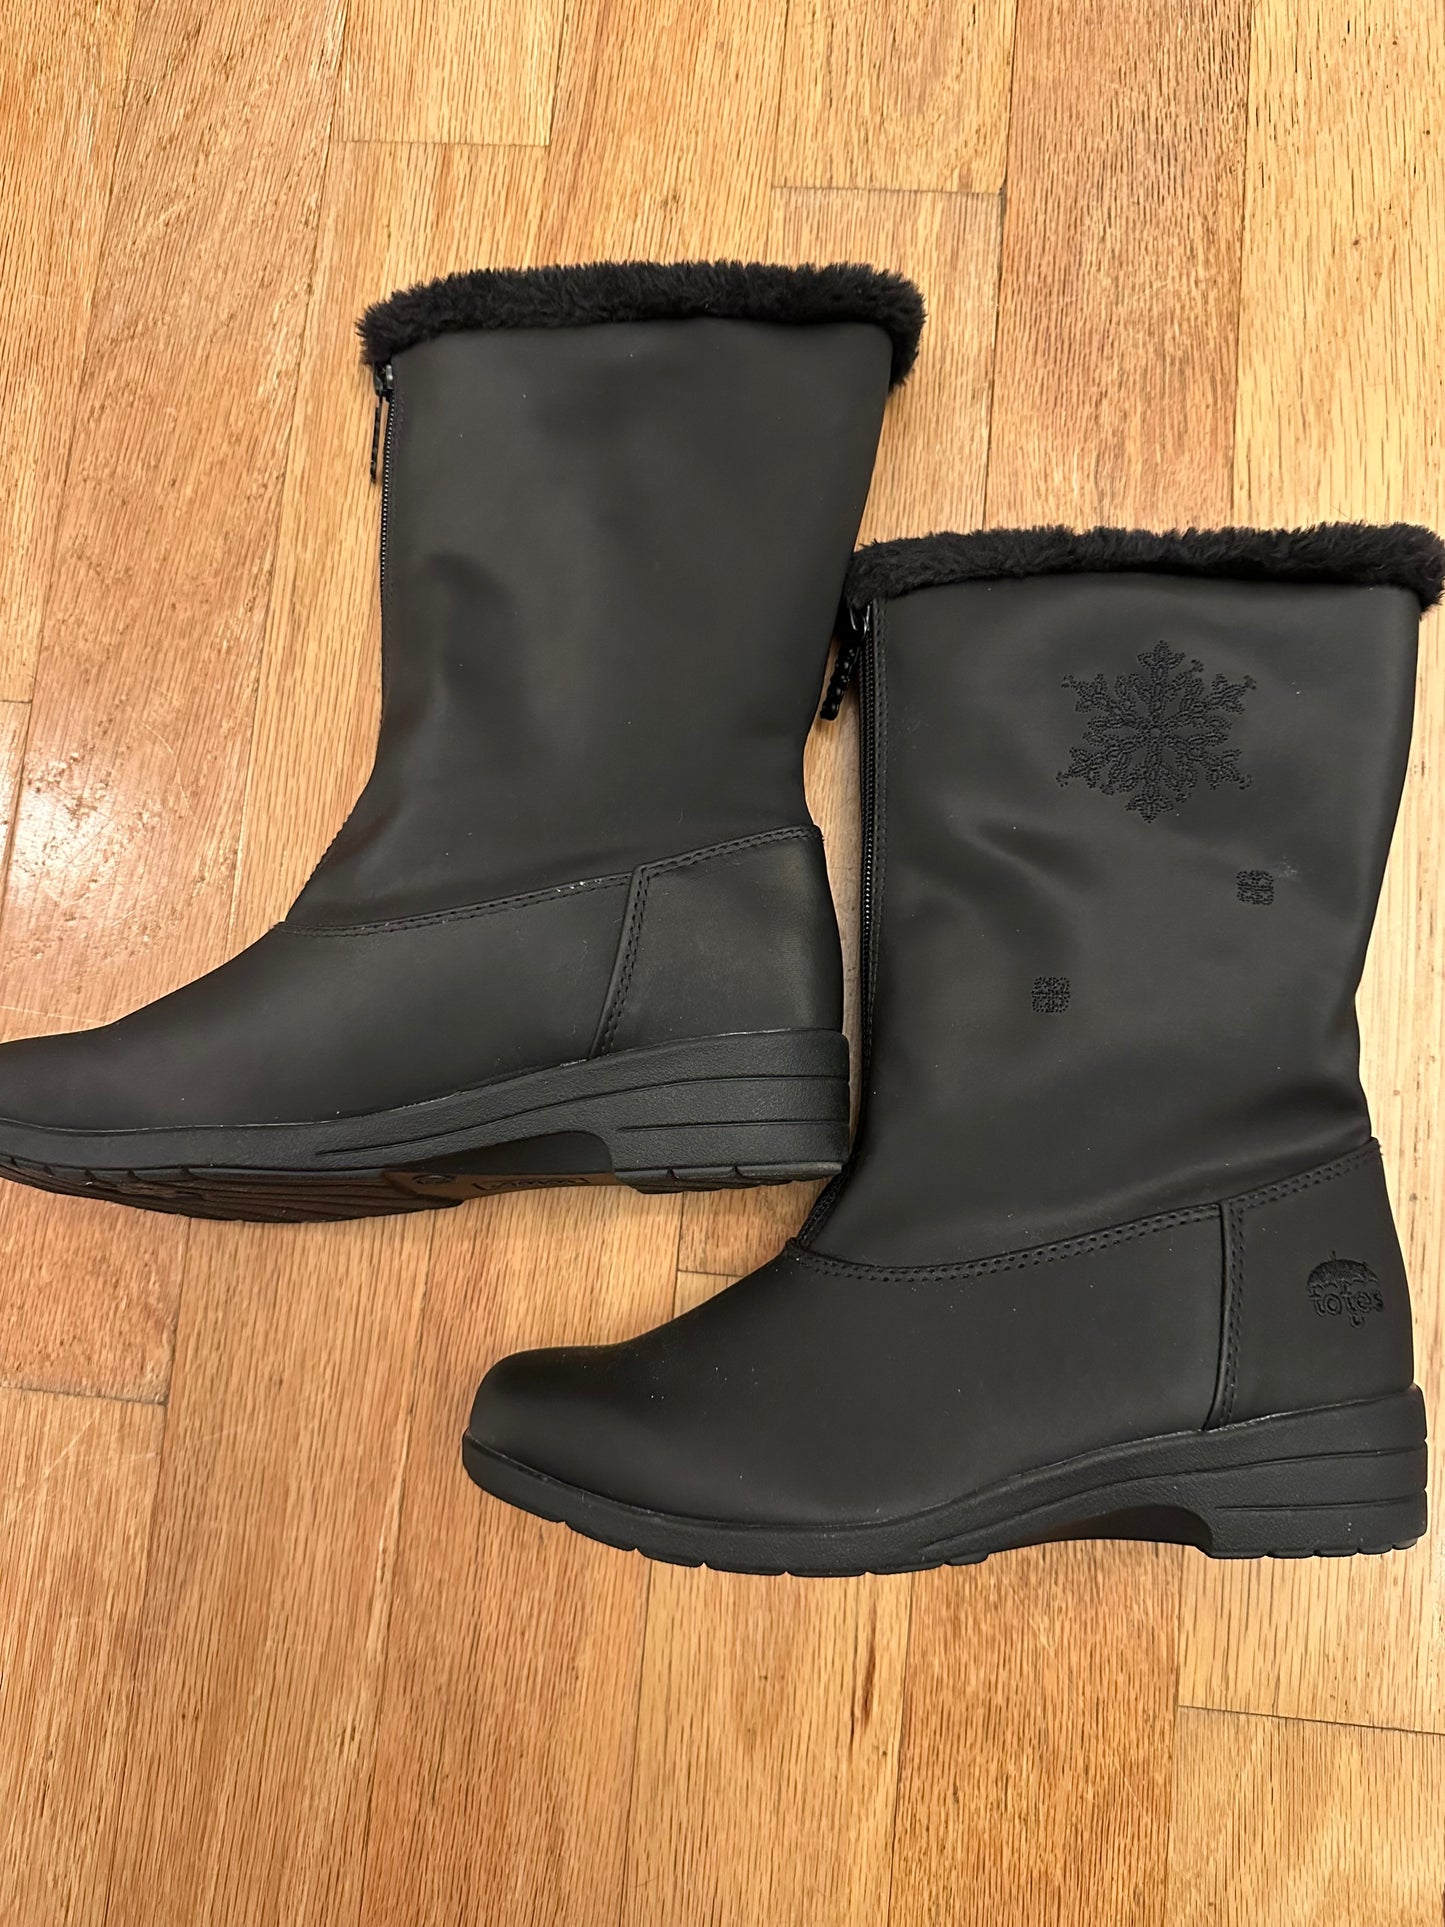 Totes Waterproof Boots size 7